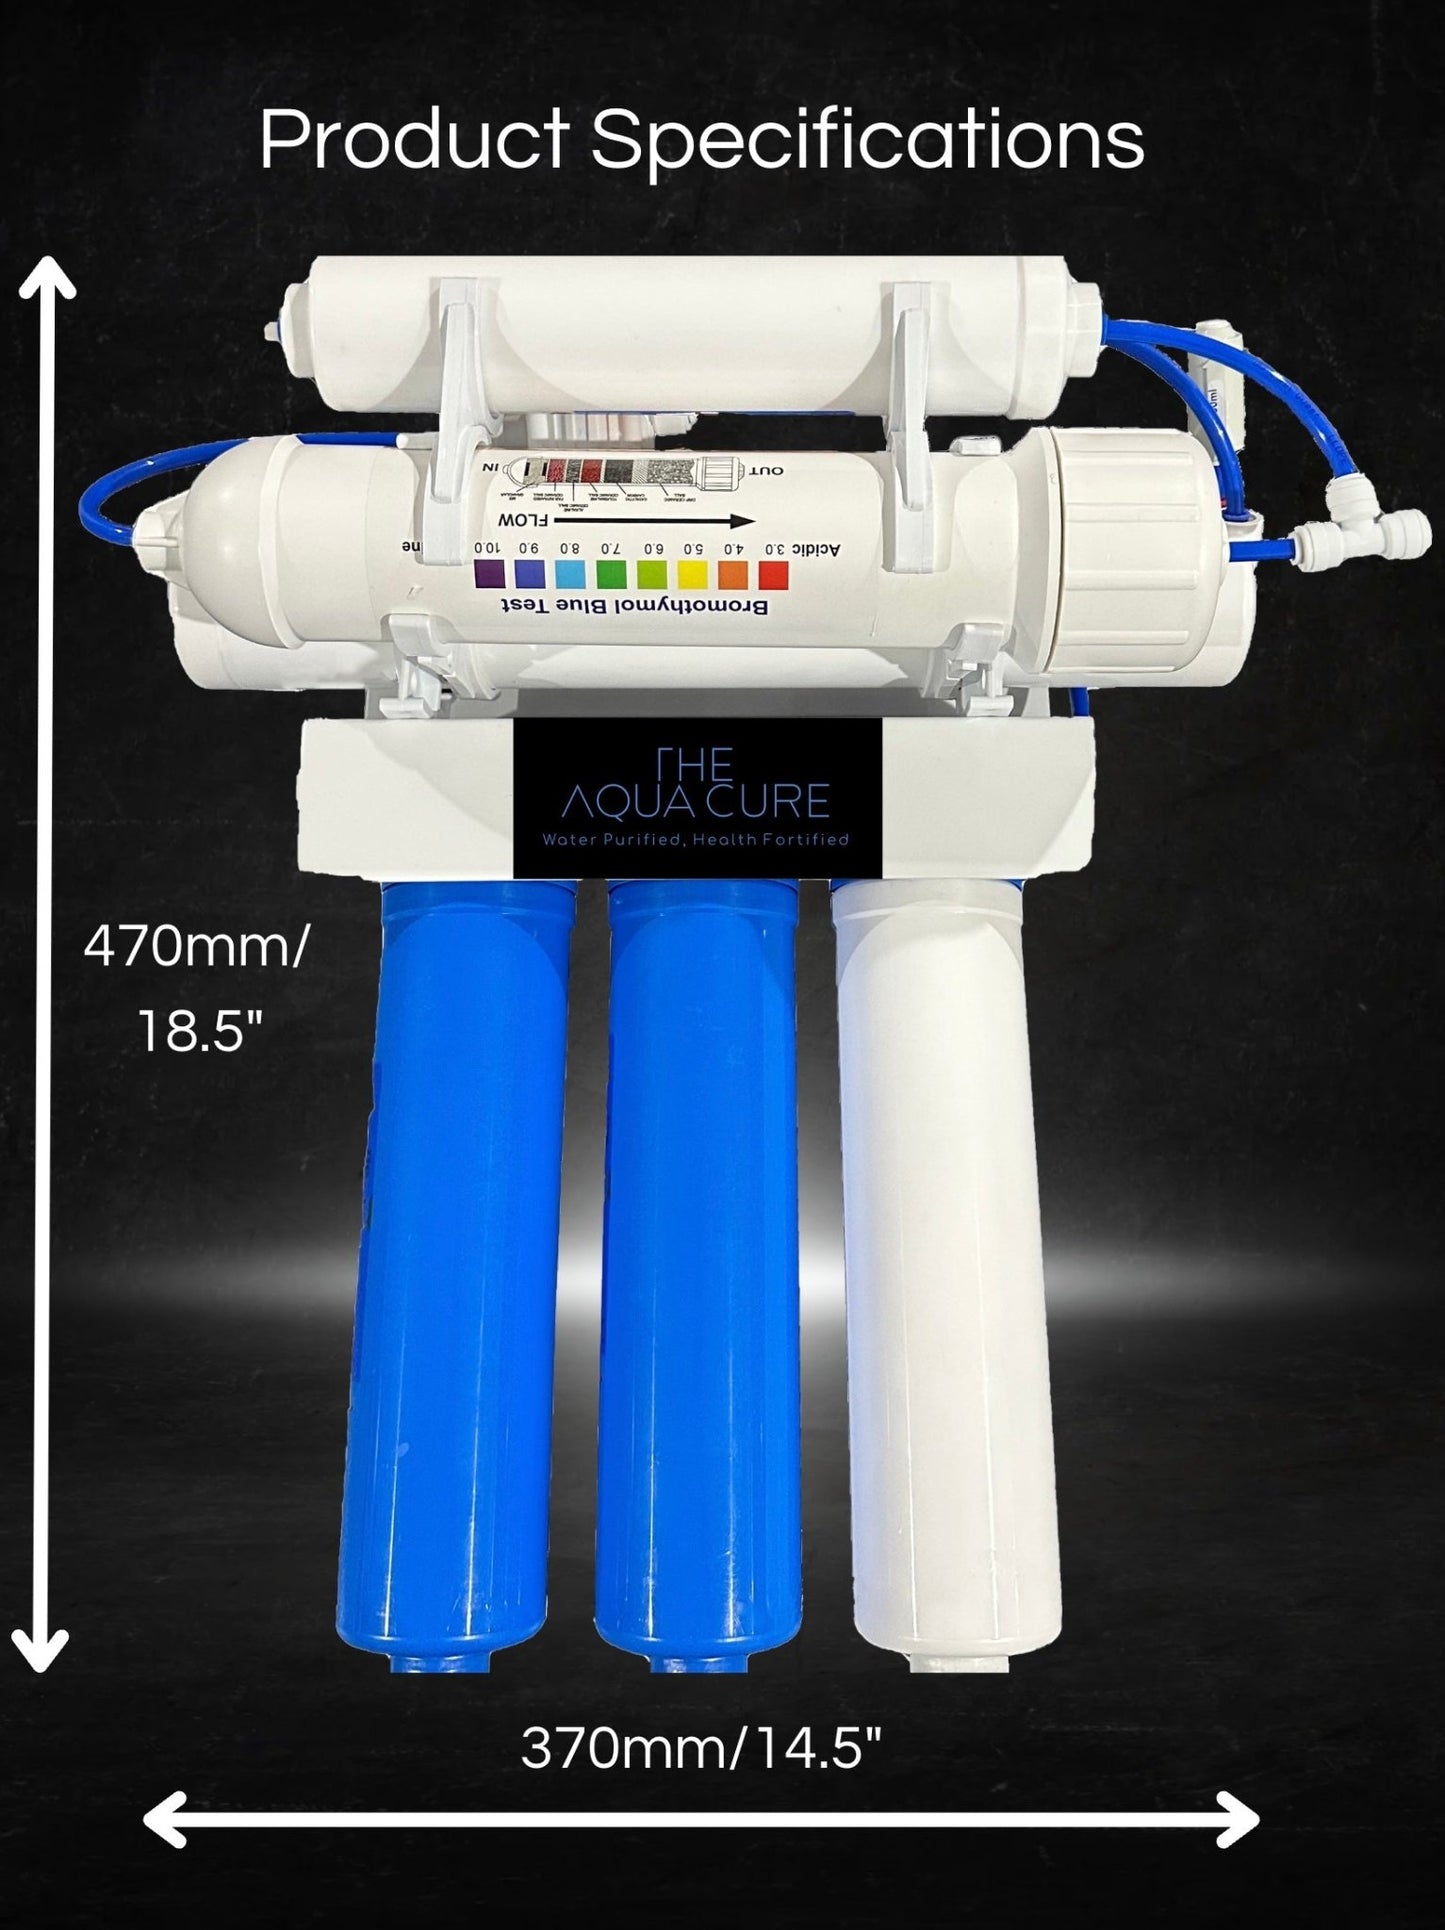 Reverse Osmosis Alkaline Water Filter system Specifications